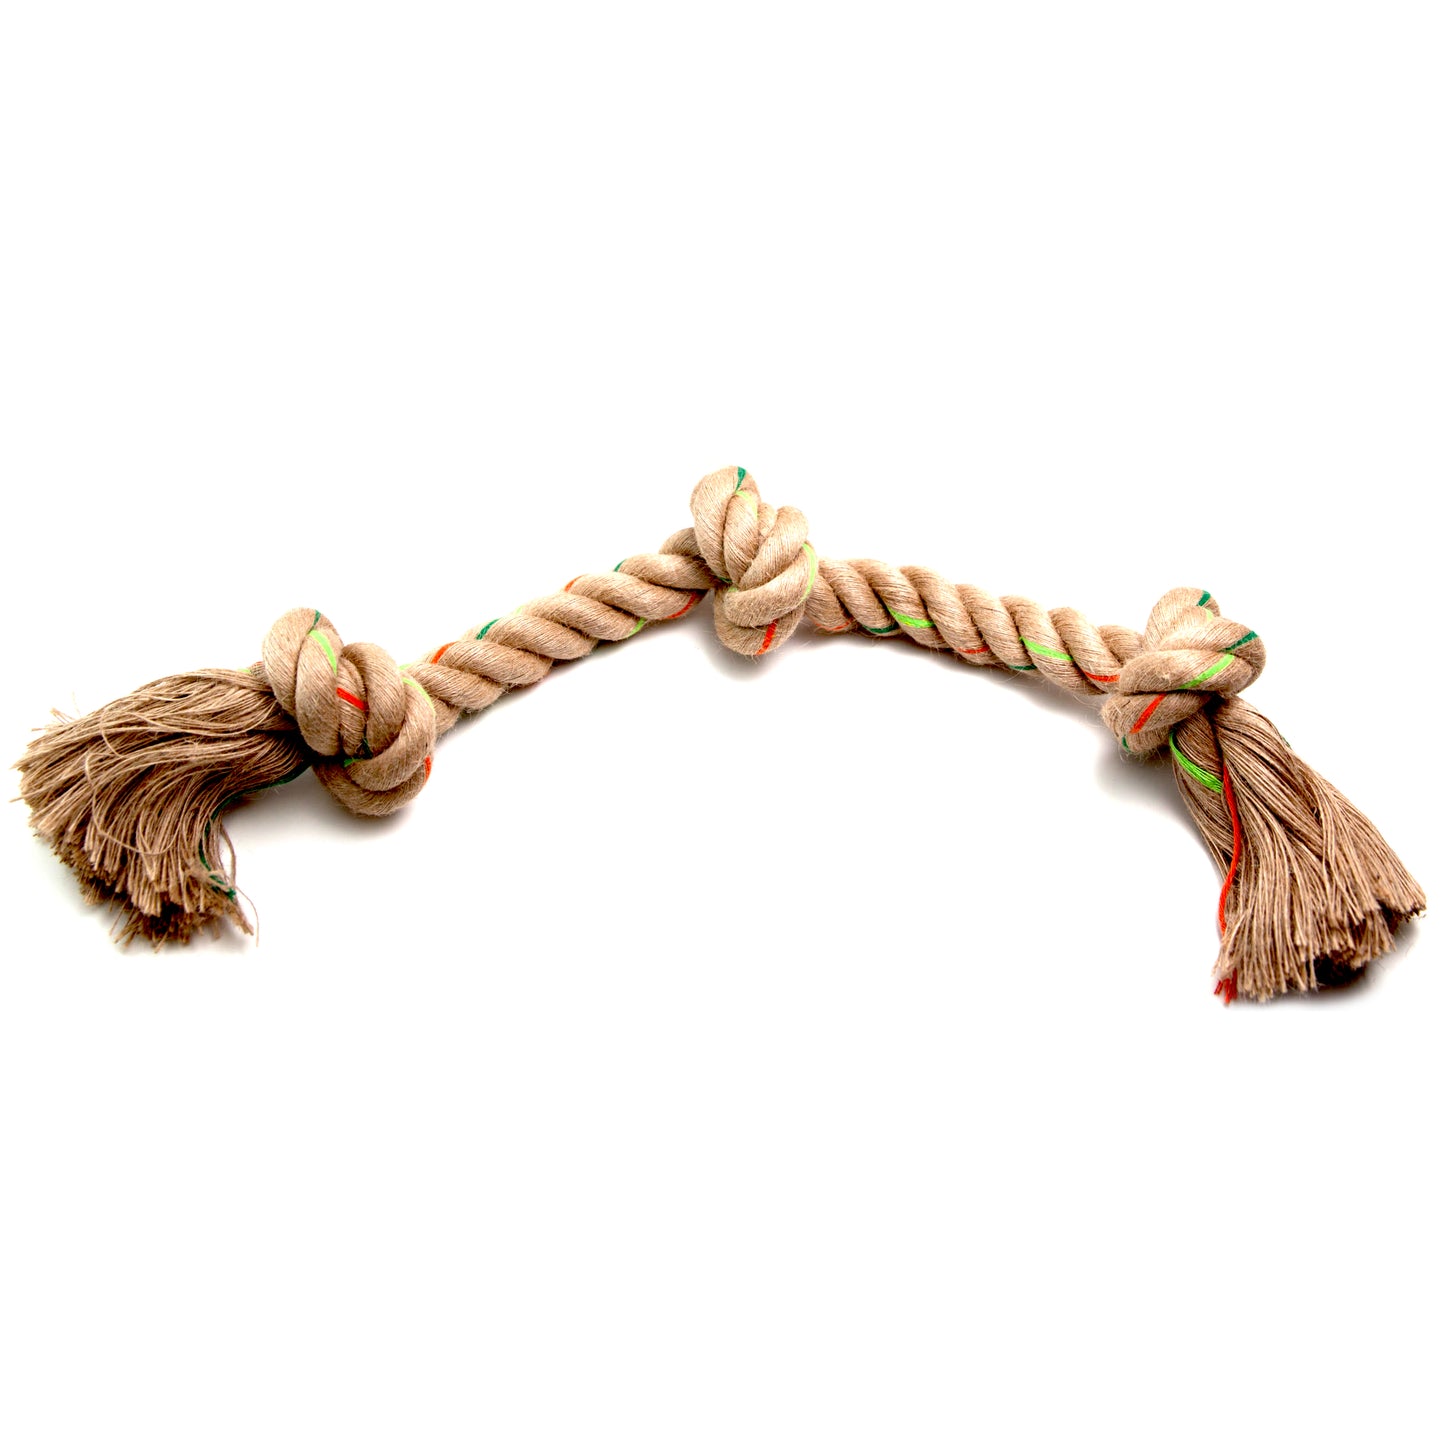 Triple Knotted Hemp Rope Toys  Image